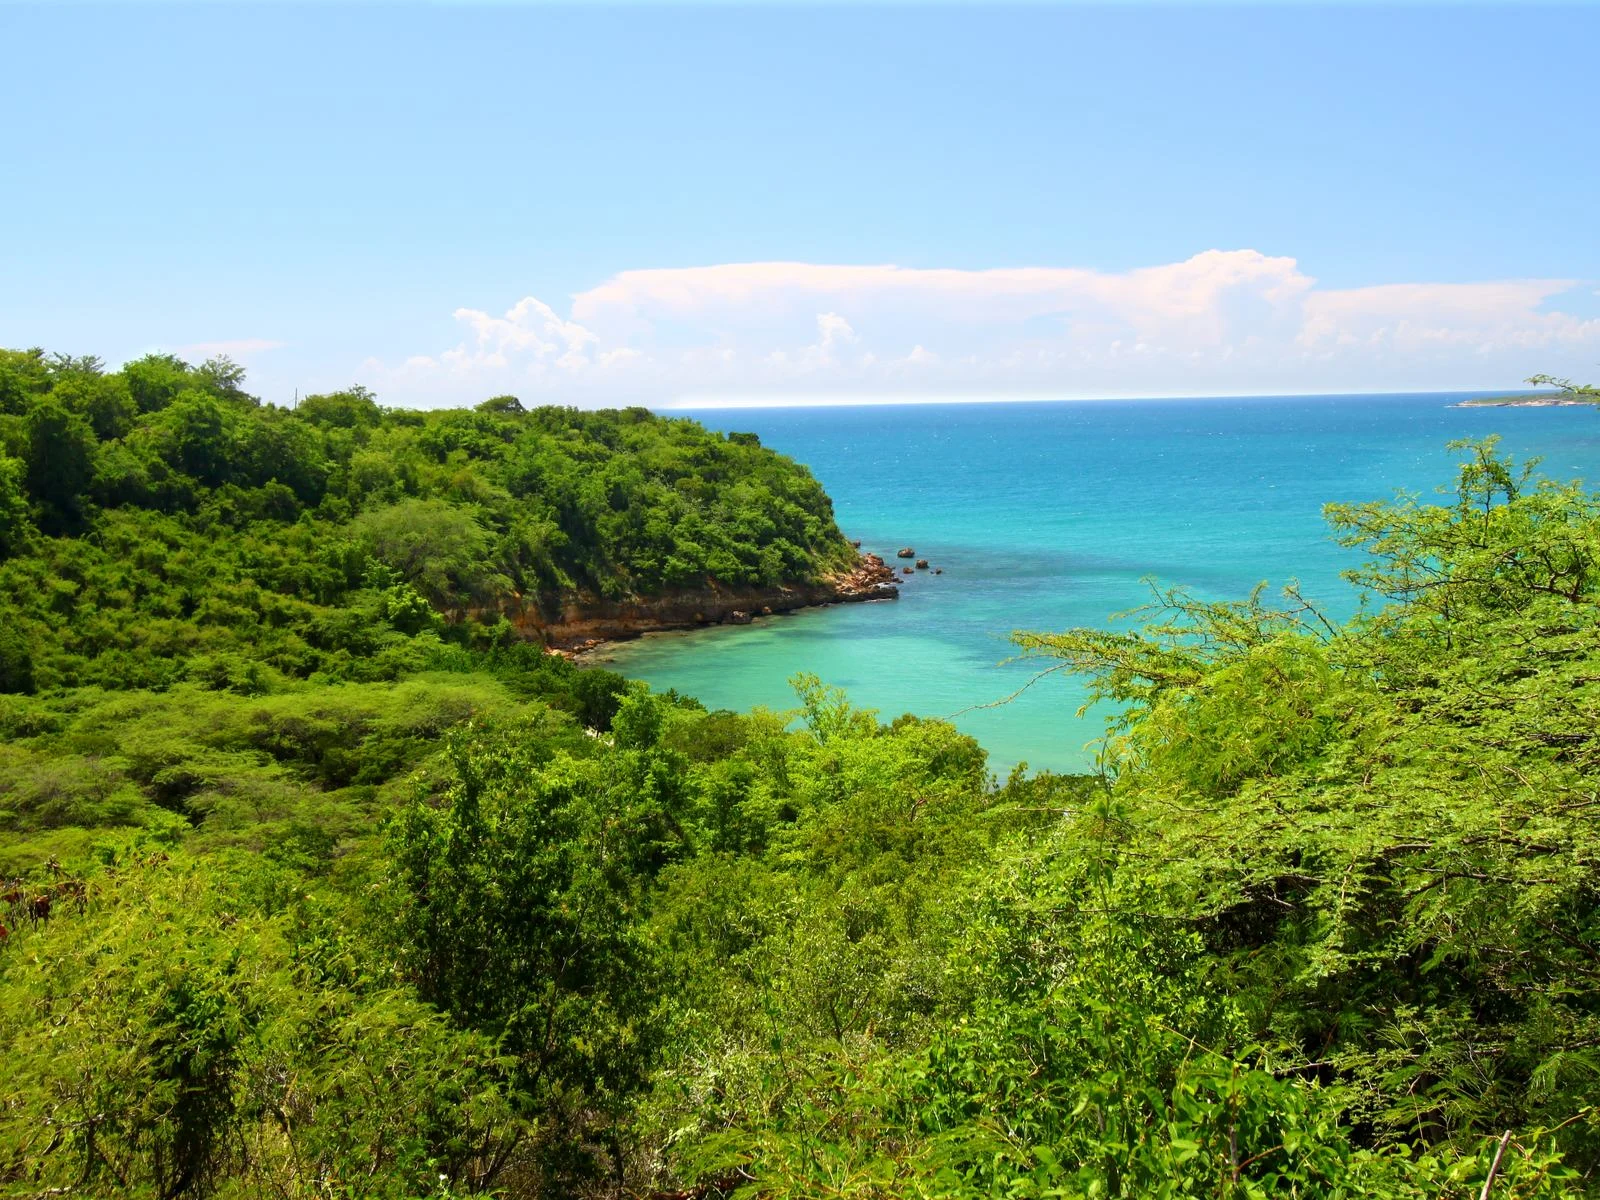 Flourishing greeneries at Guanica State Forest, considered one of the best places to visit in Puerto Rico, near the coast with crystal clear water